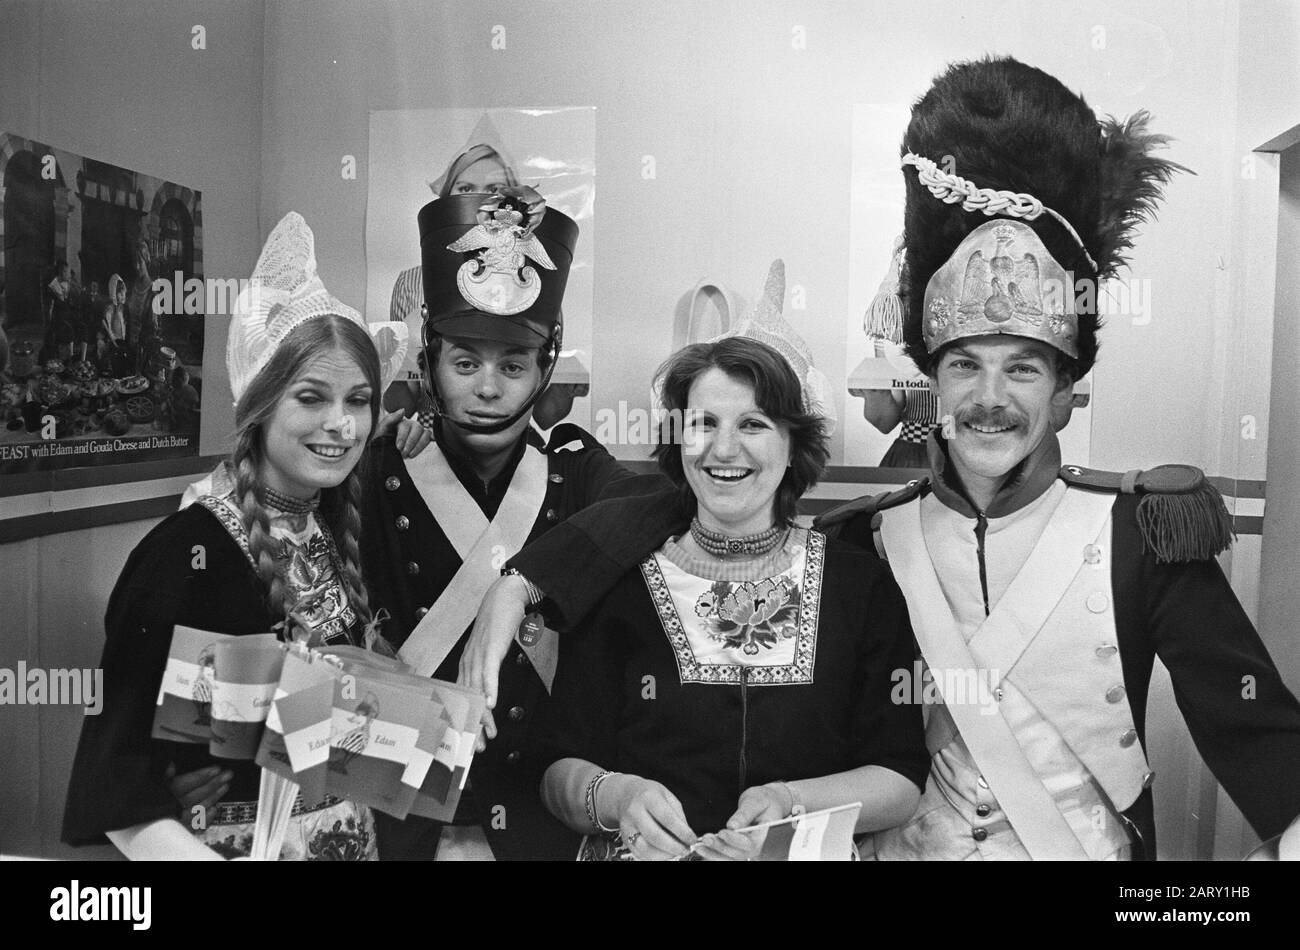 Marine Chapel at the Royal Tournament at the Earls Court Exhibition Building  Two Dutch cheese girls with two English soldiers Date: 17 July 1975 Location: Great Britain, London Keywords: headgear, costume, military, uniforms Institution name: Marine Chapel of the Royal Navy Stock Photo